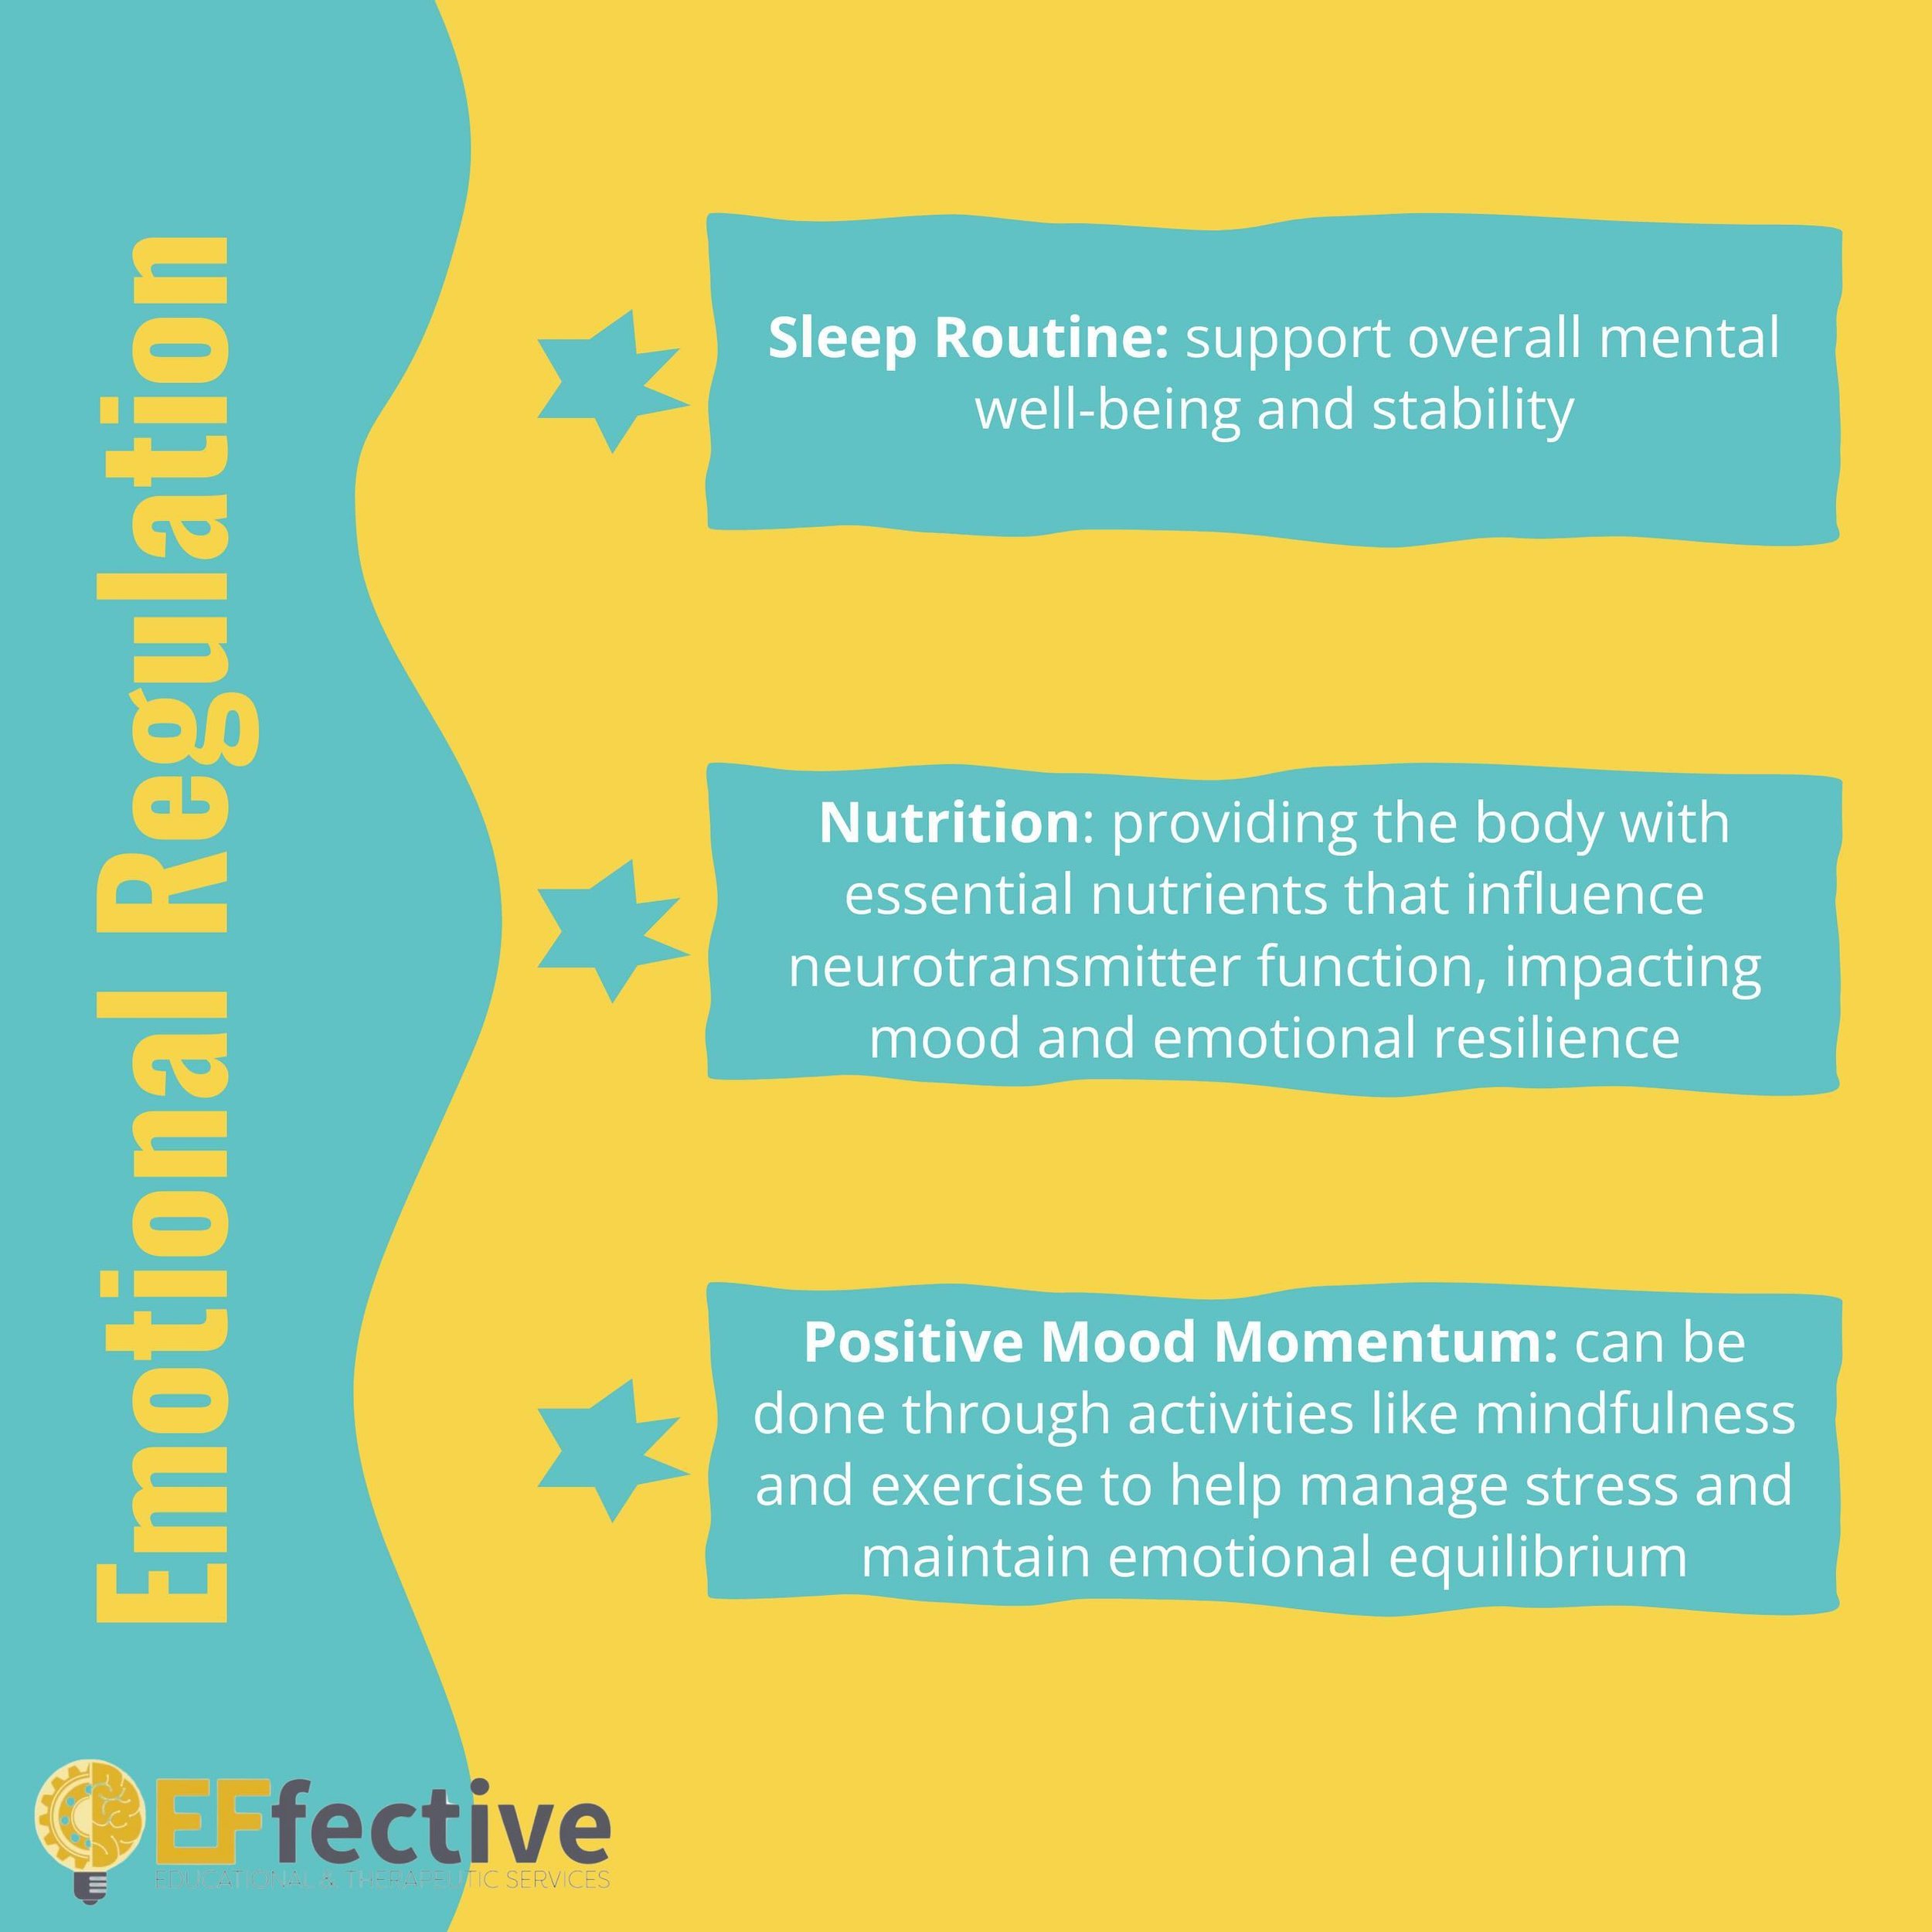 Unlocking emotional balance for your child starts with the essentials: sleep, nutrition, and positive mood momentum. Discover how Effective Therapeutic and Educational Services can help support your family&rsquo;s journey. Email us at info@effective-